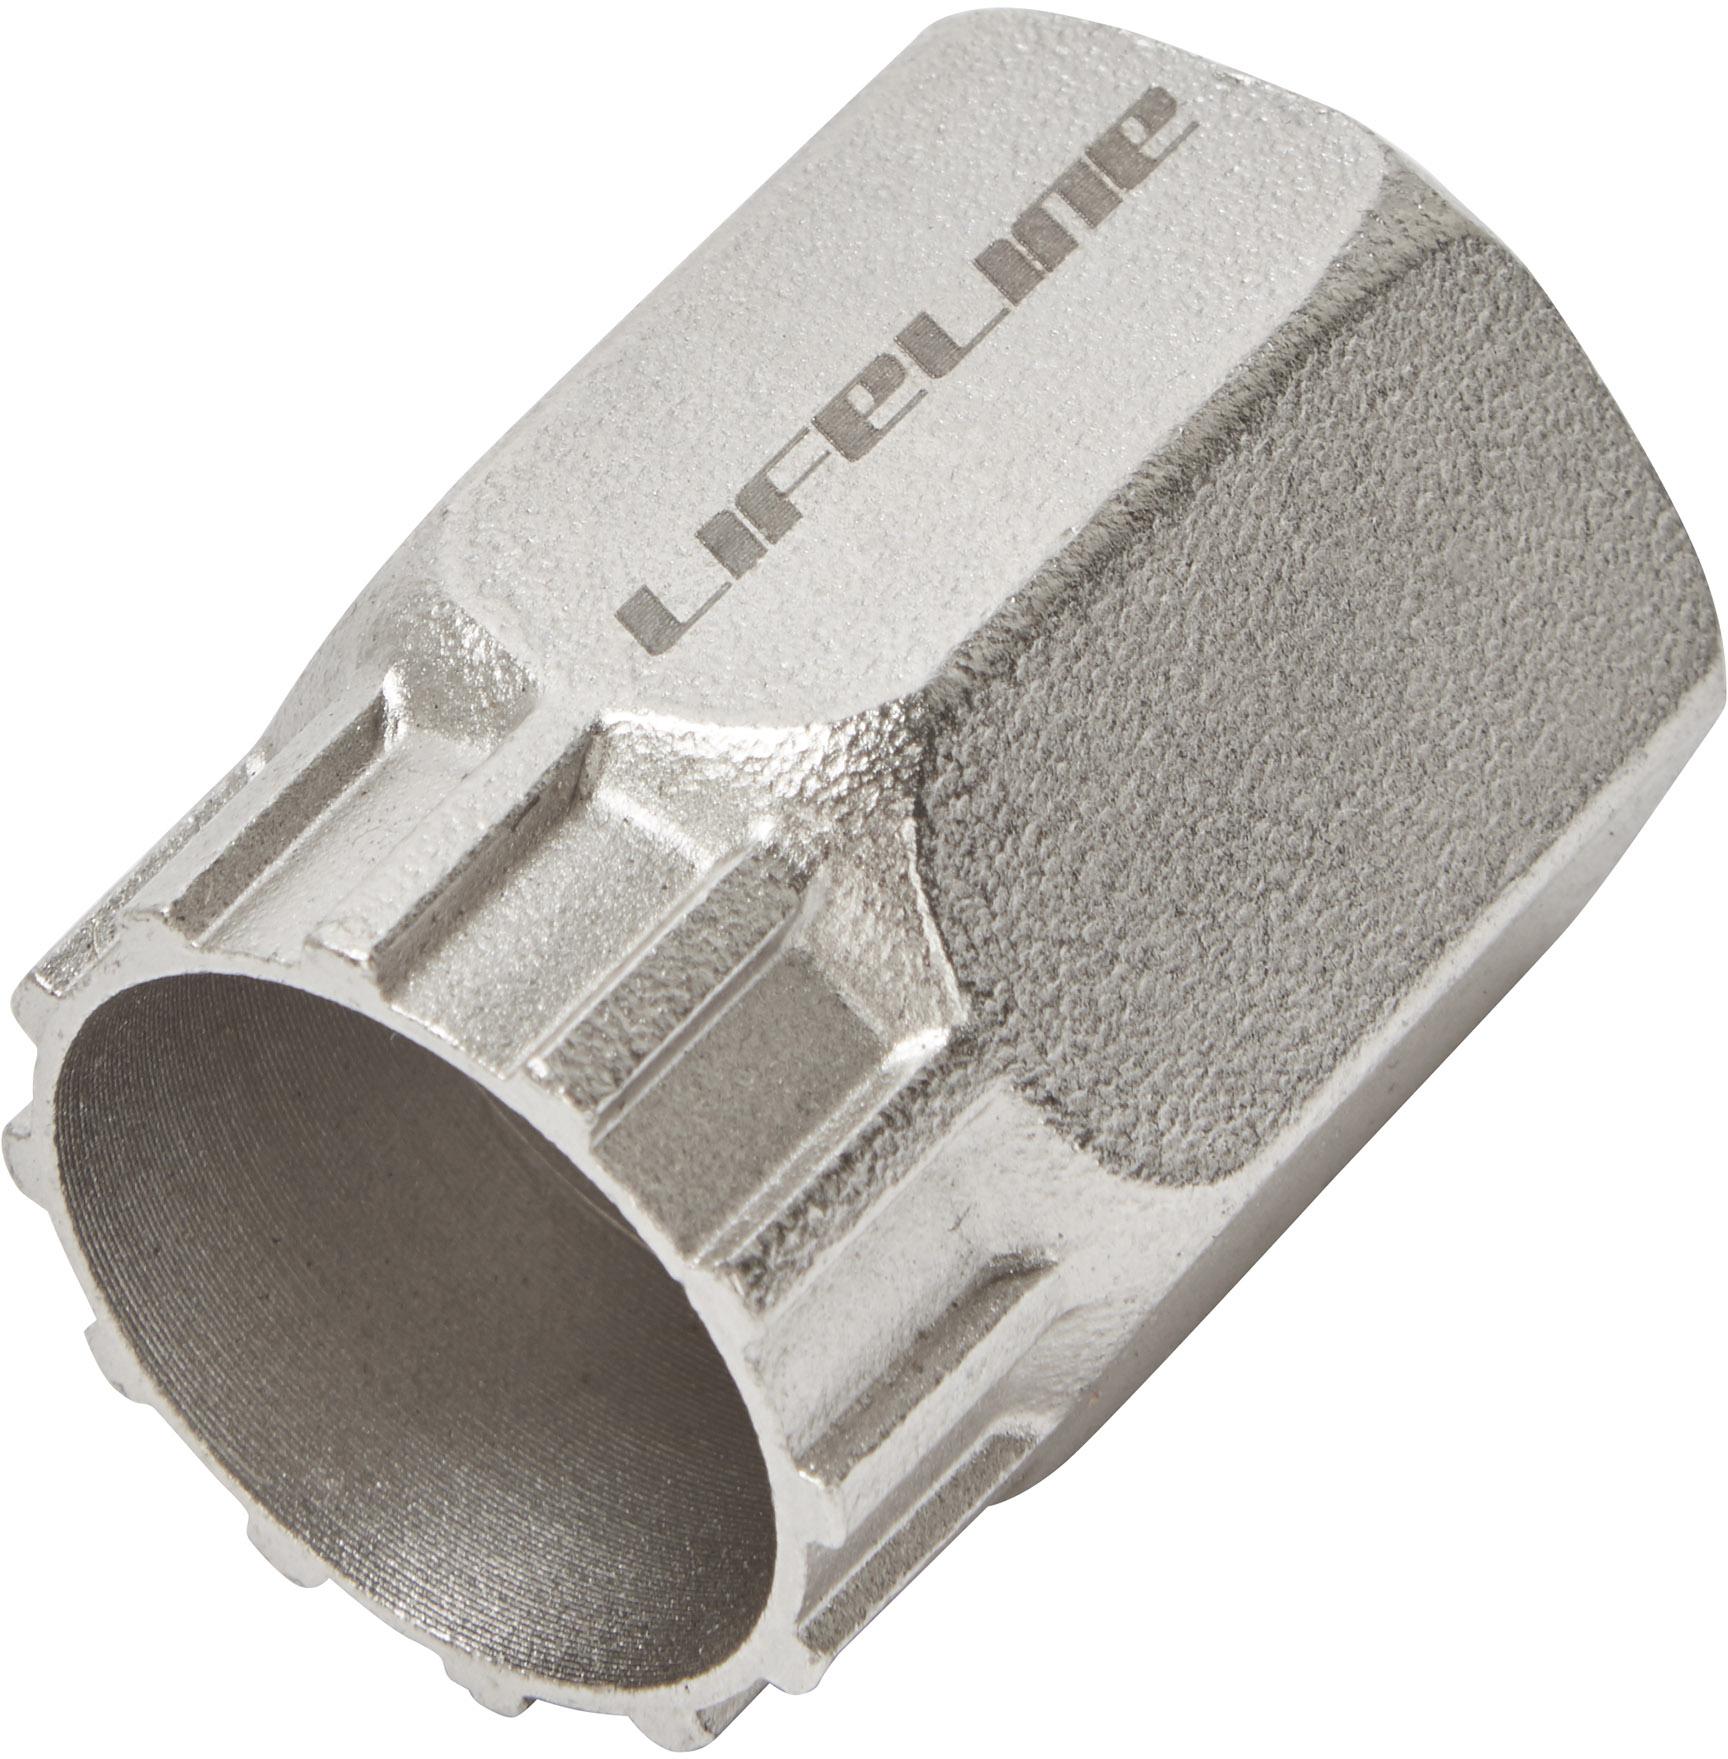 Lifeline Cassette And Fork Top Cap Tool - Silver